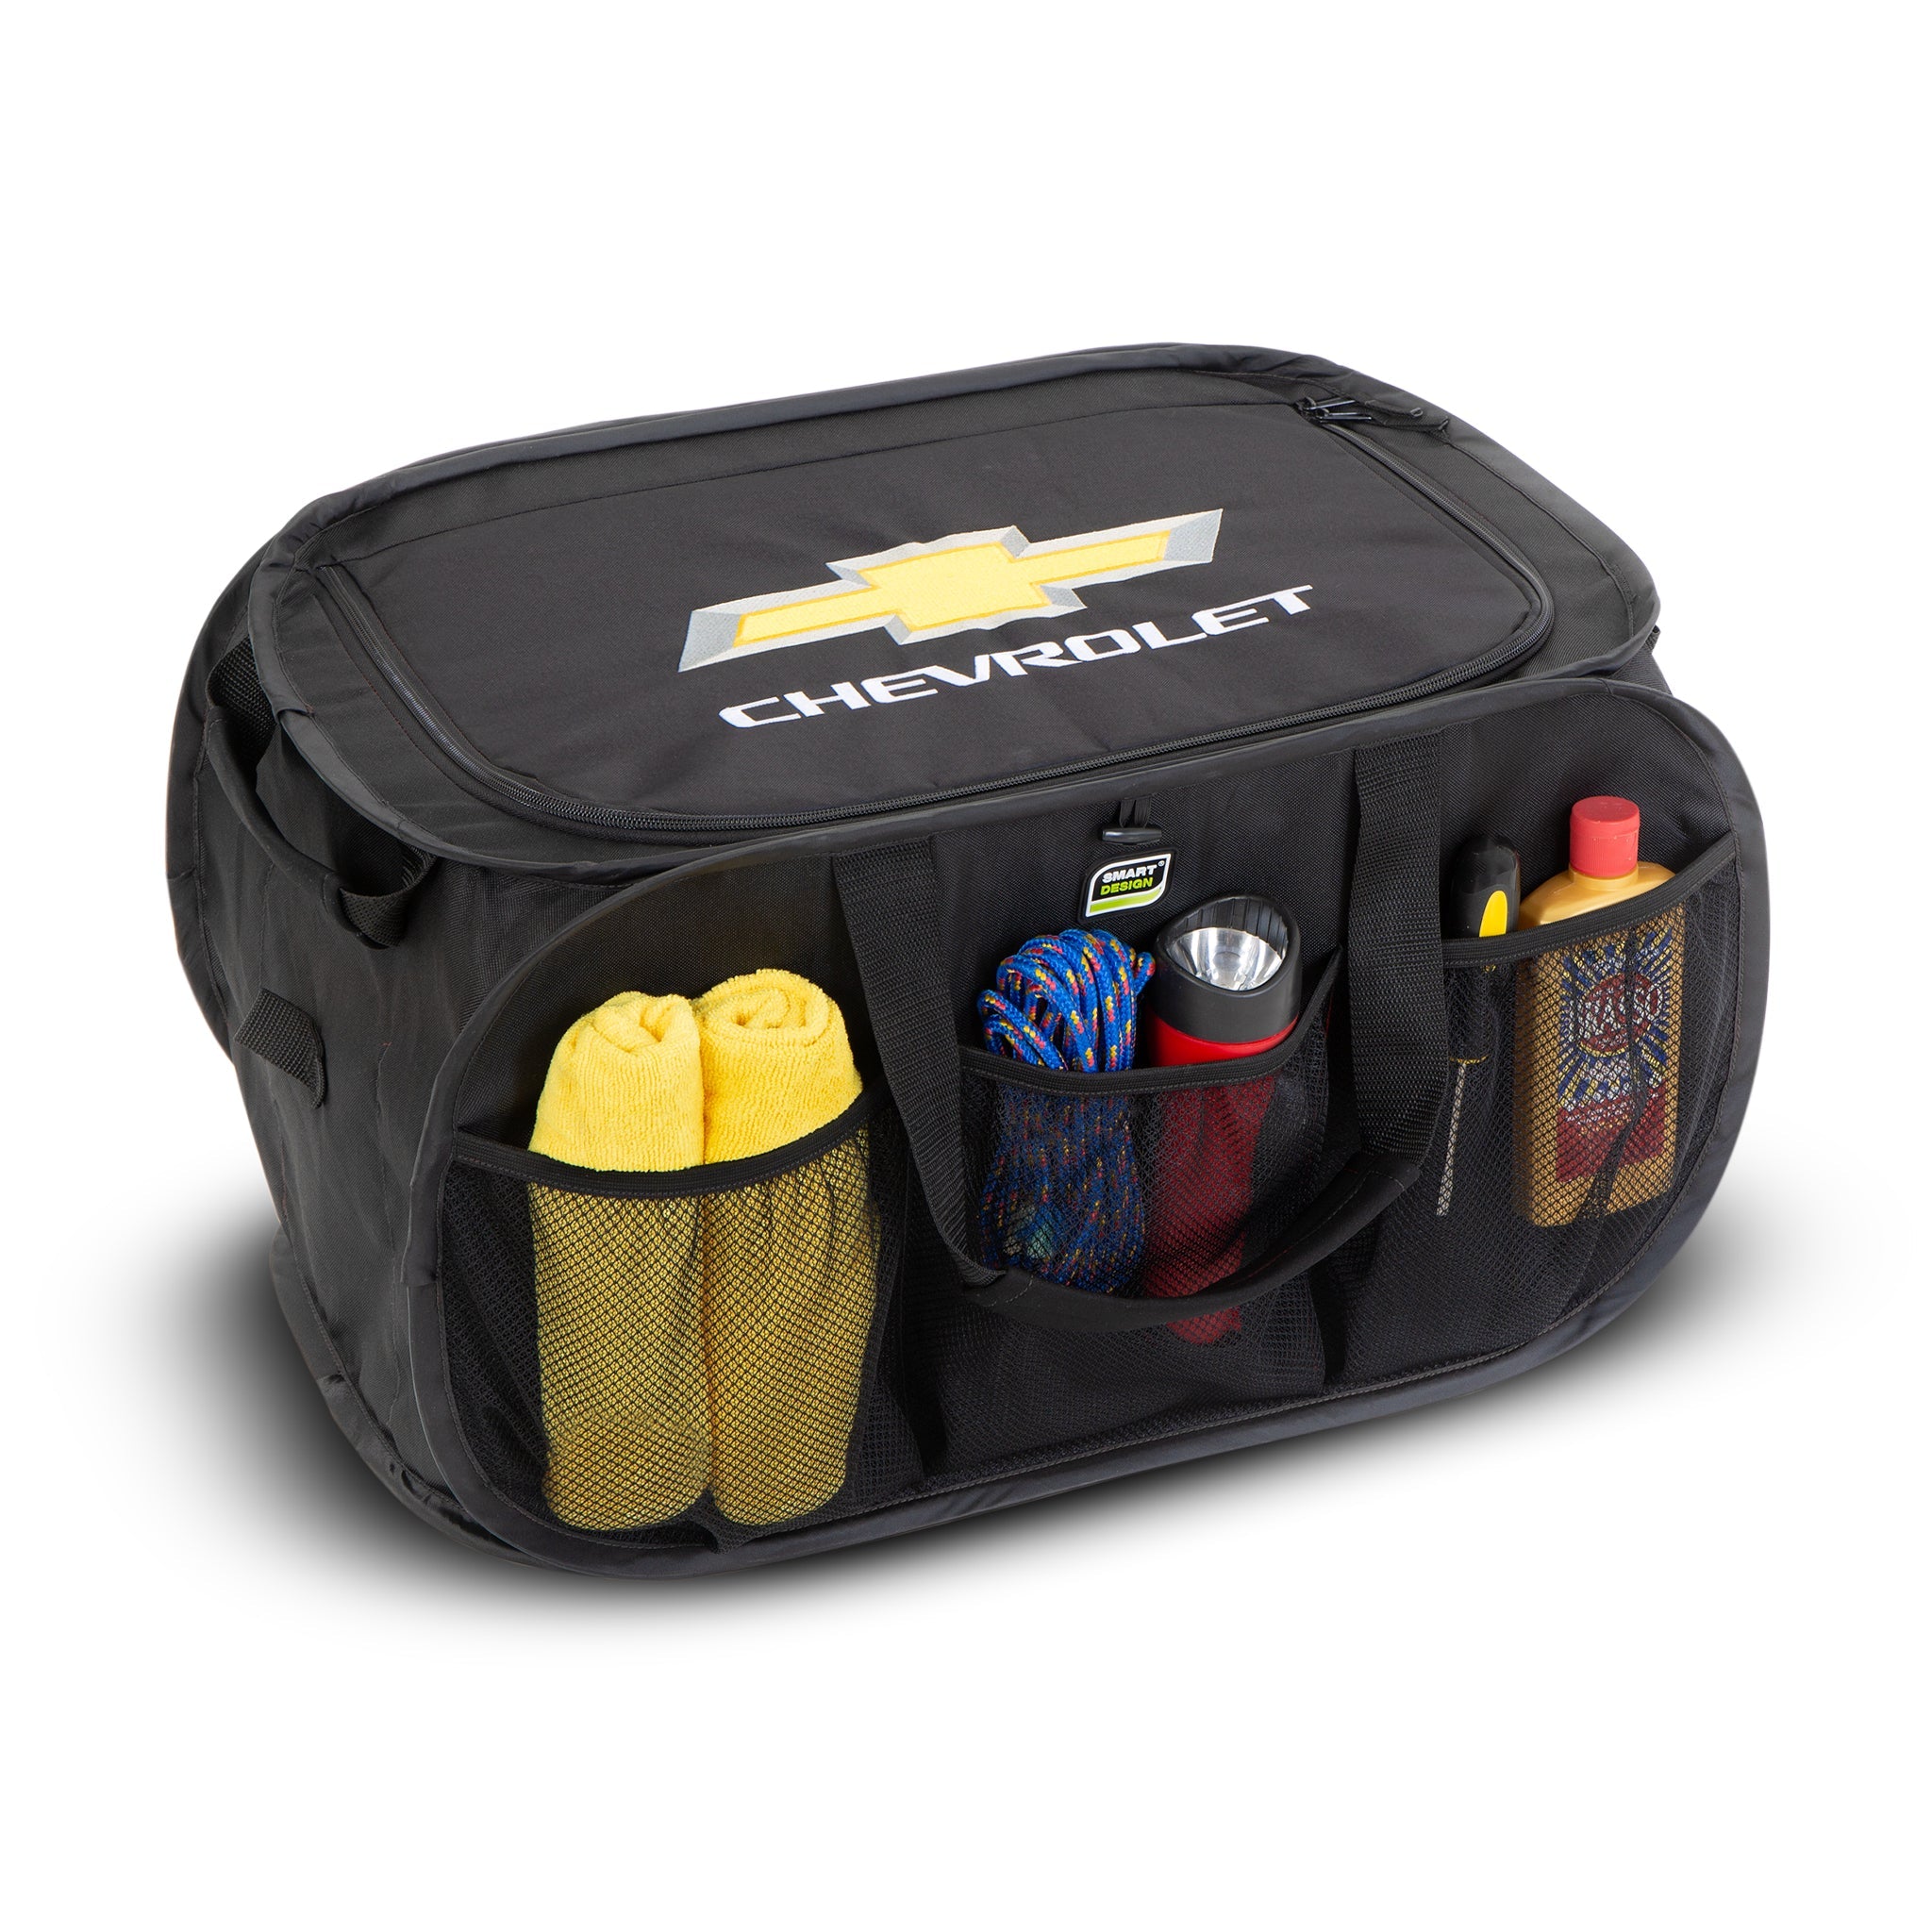 Chevrolet Pop Up Trunk Organizer with Easy Carry Handles, Side